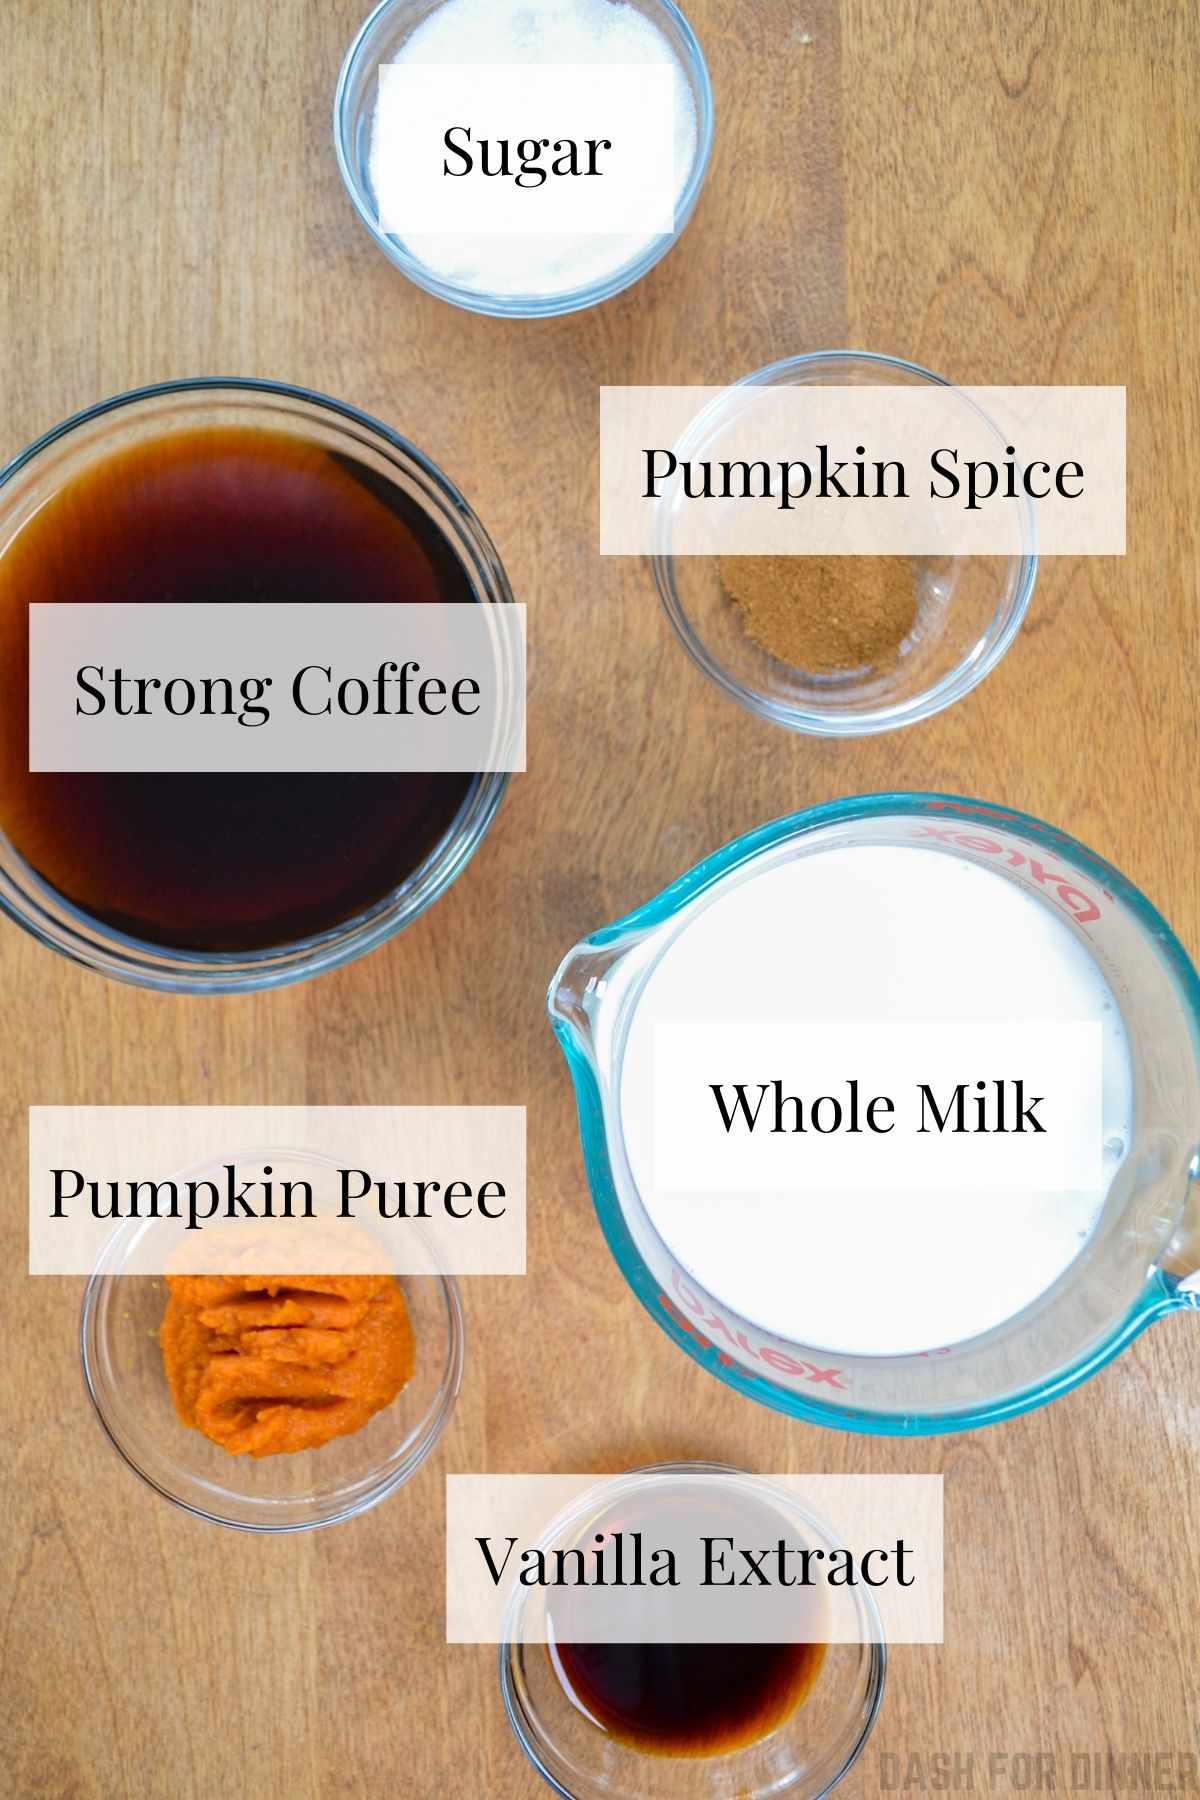 The ingredients needed to make a pumpkin spice latte in an Instant Pot.